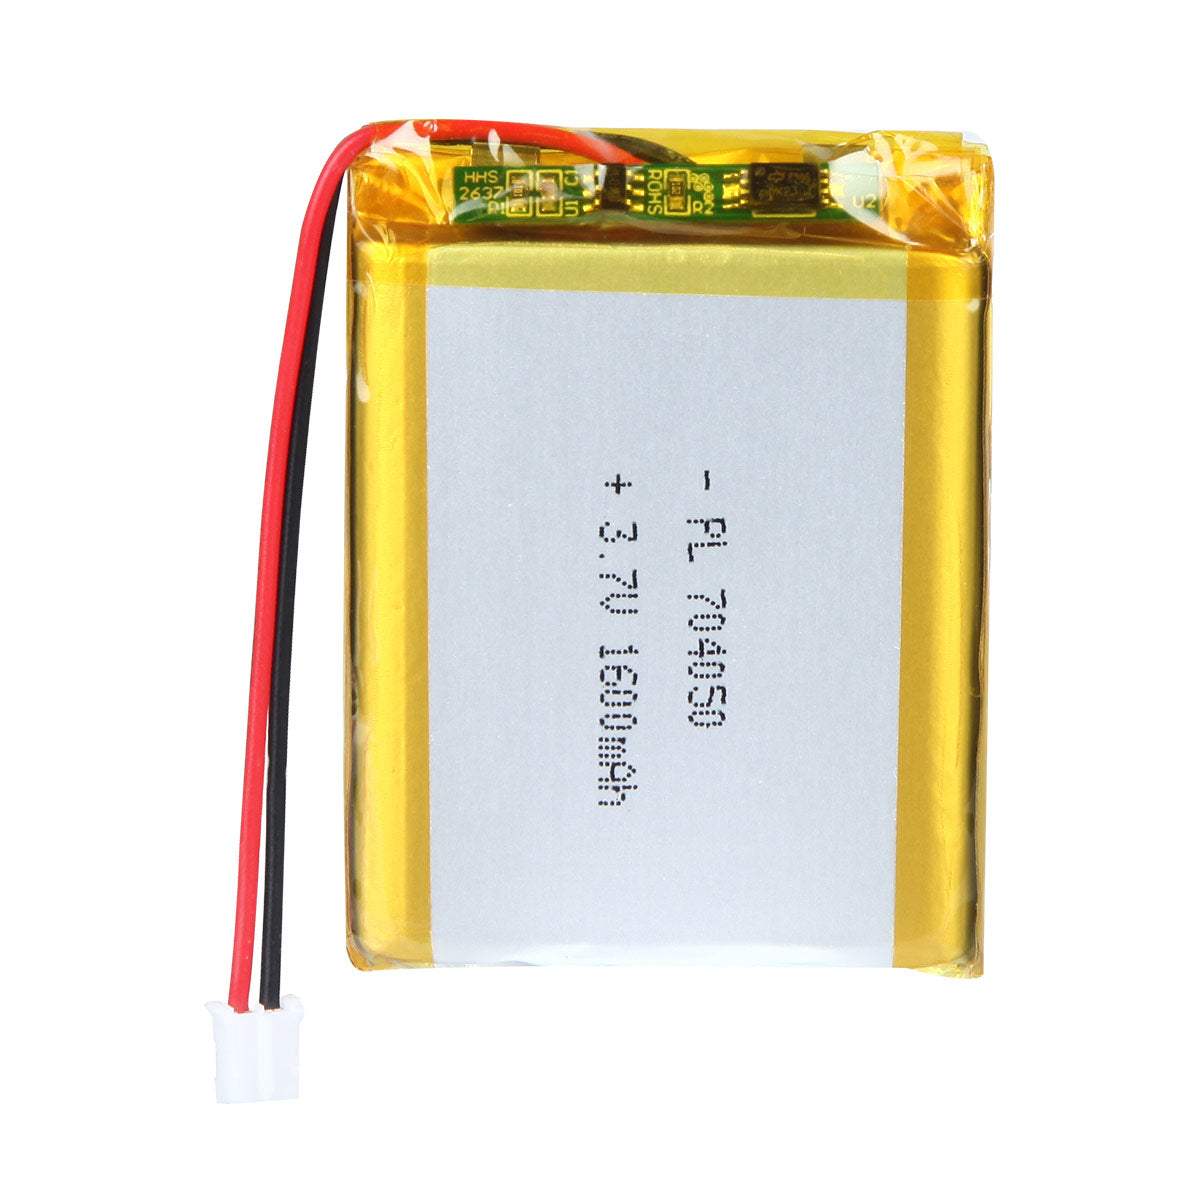 YDL 3.7V 1600mAh 704050 Rechargeable Lithium Polymer Battery